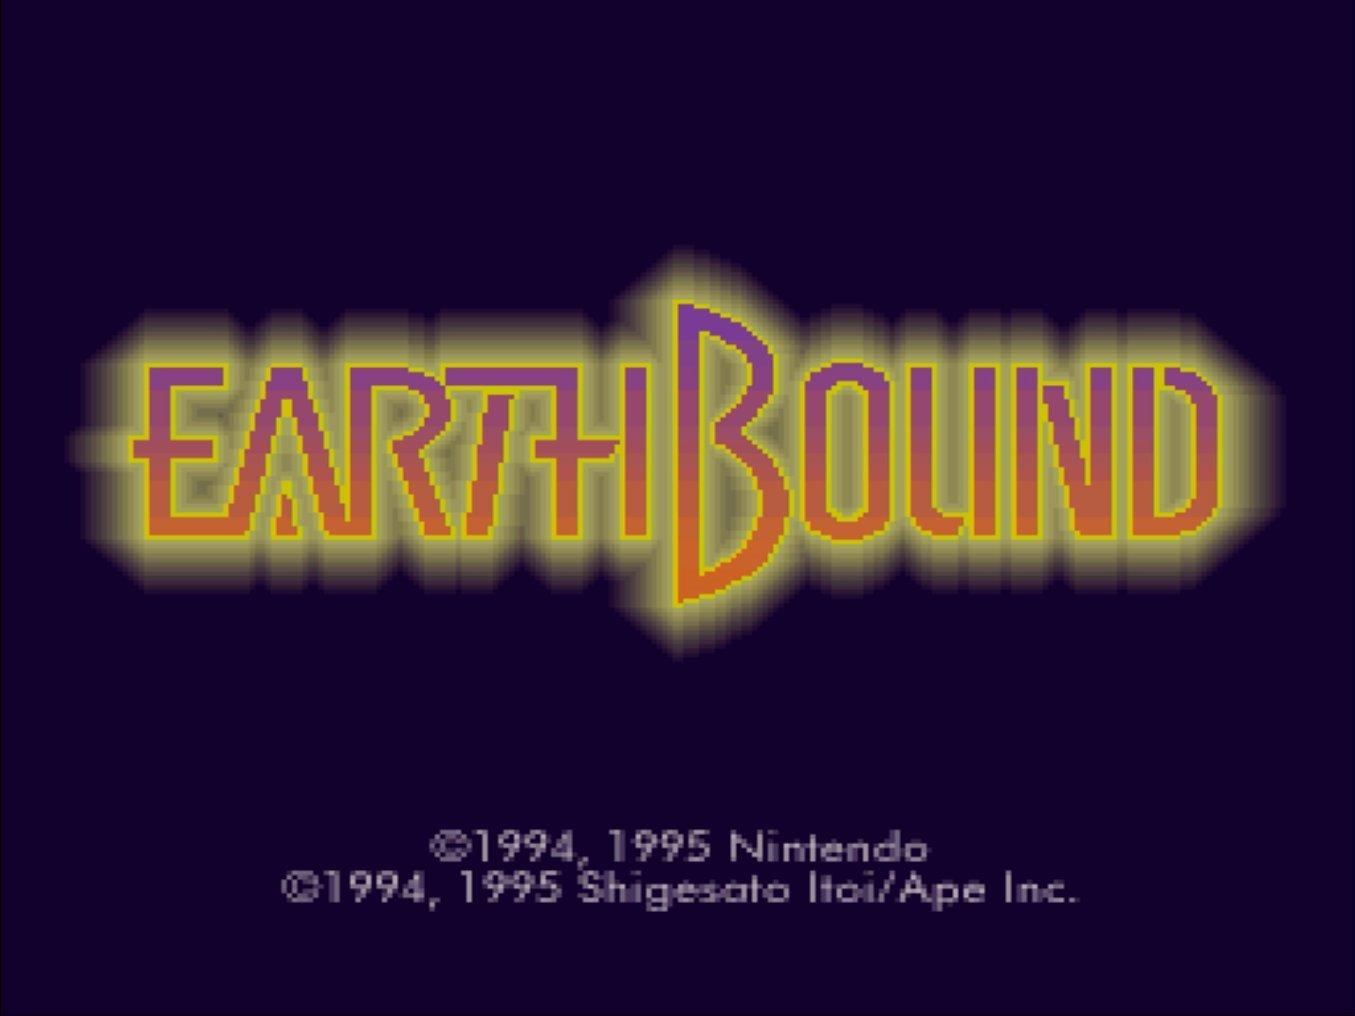 earthbound value